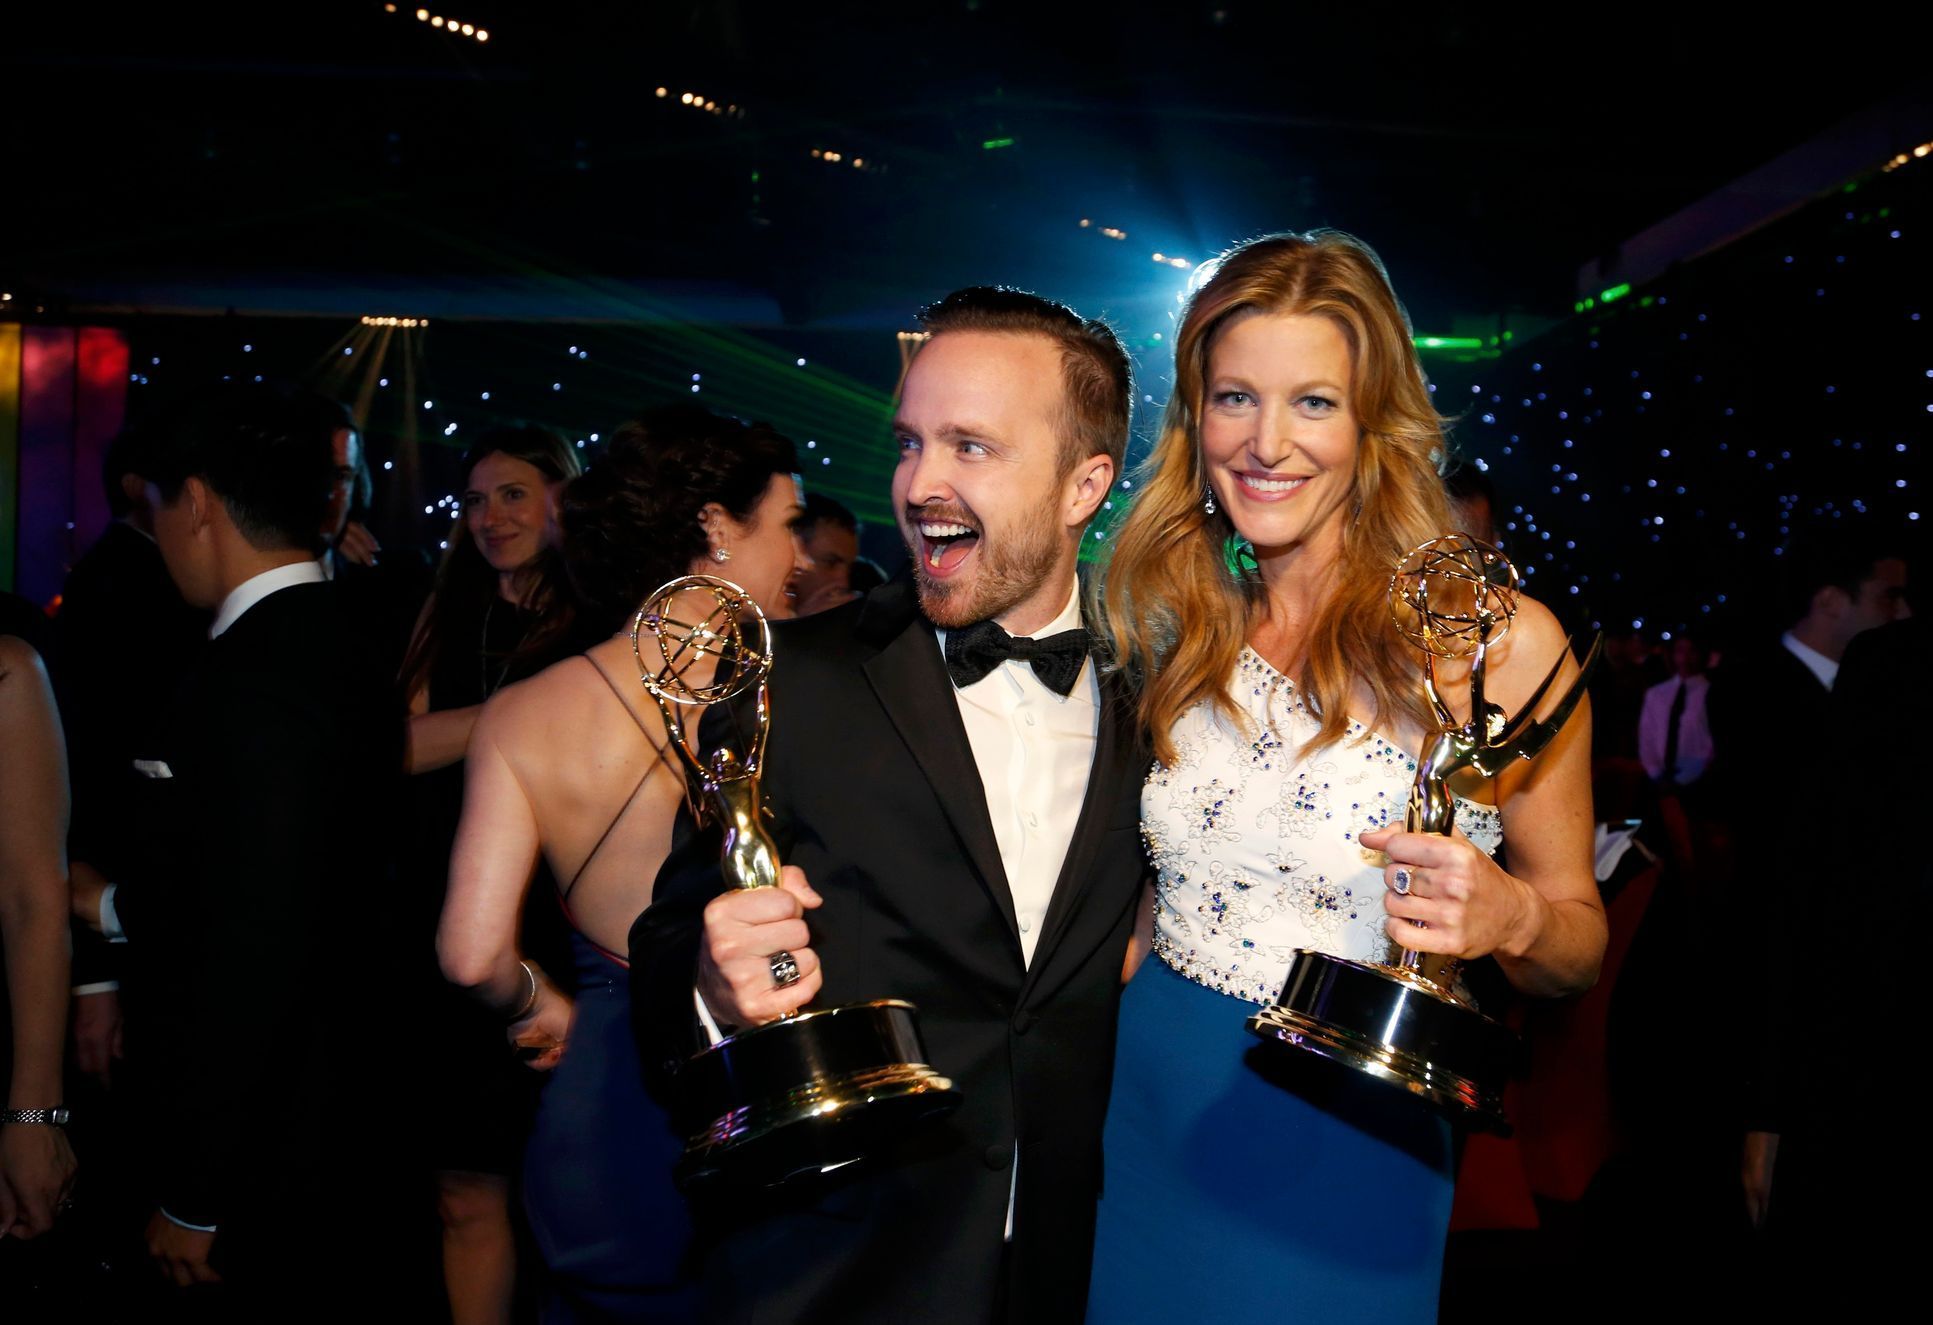 Aaron Paul with his Outstanding Supporting Actor in a Drama Series award and Anna Gunn with her Outstanding Supporting Actress in a Drama Series award attend the Governors Ball for the 66th Primetime